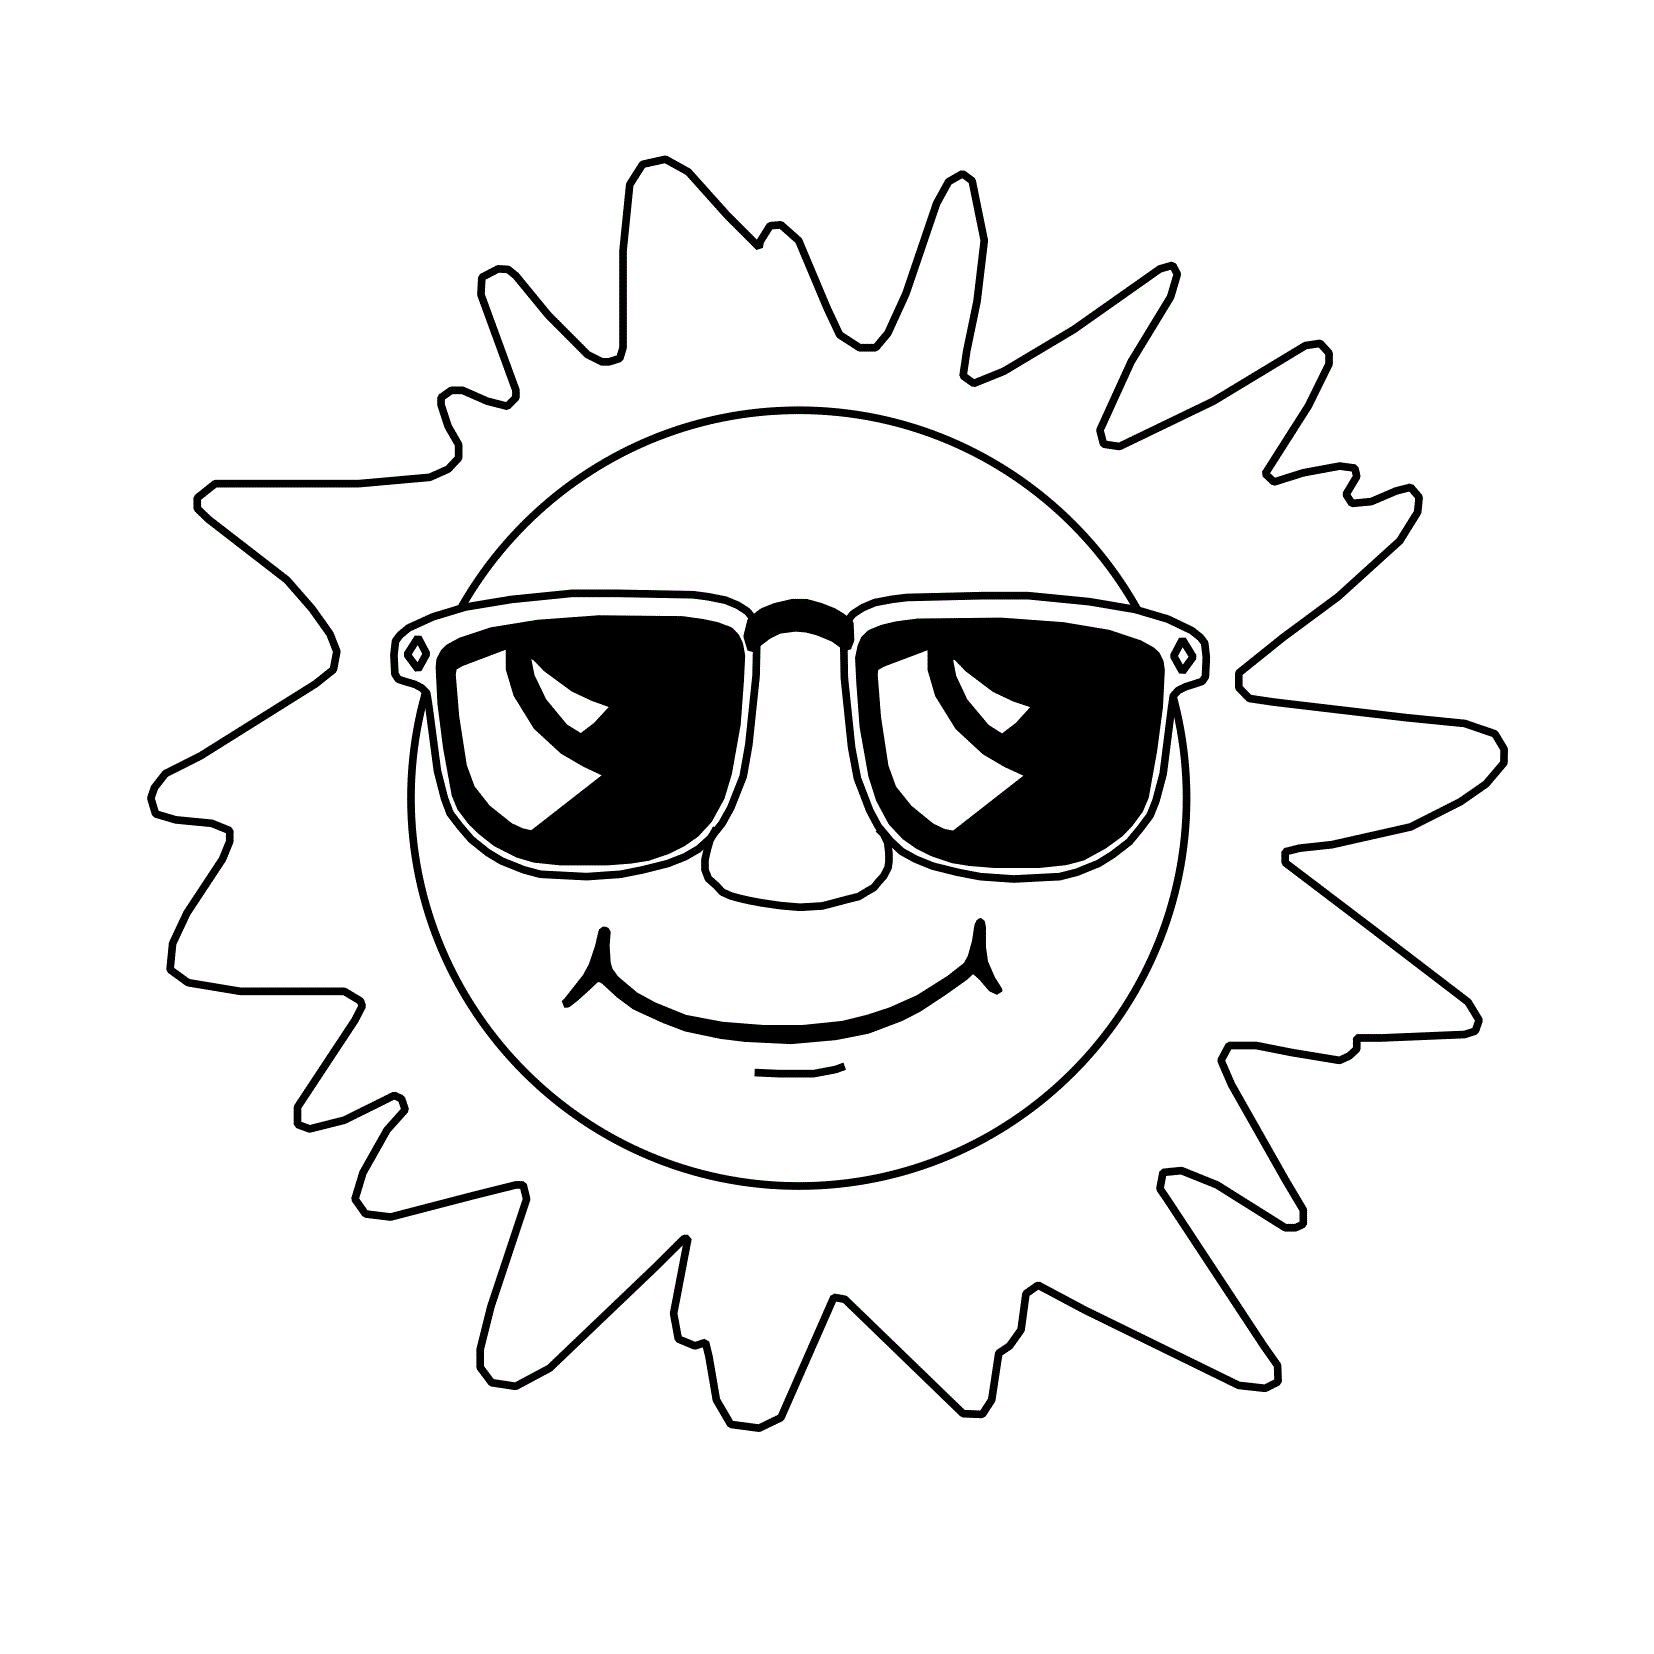 Free Printable Sun Coloring Pages For Kids Effy Moom Free Coloring Picture wallpaper give a chance to color on the wall without getting in trouble! Fill the walls of your home or office with stress-relieving [effymoom.blogspot.com]